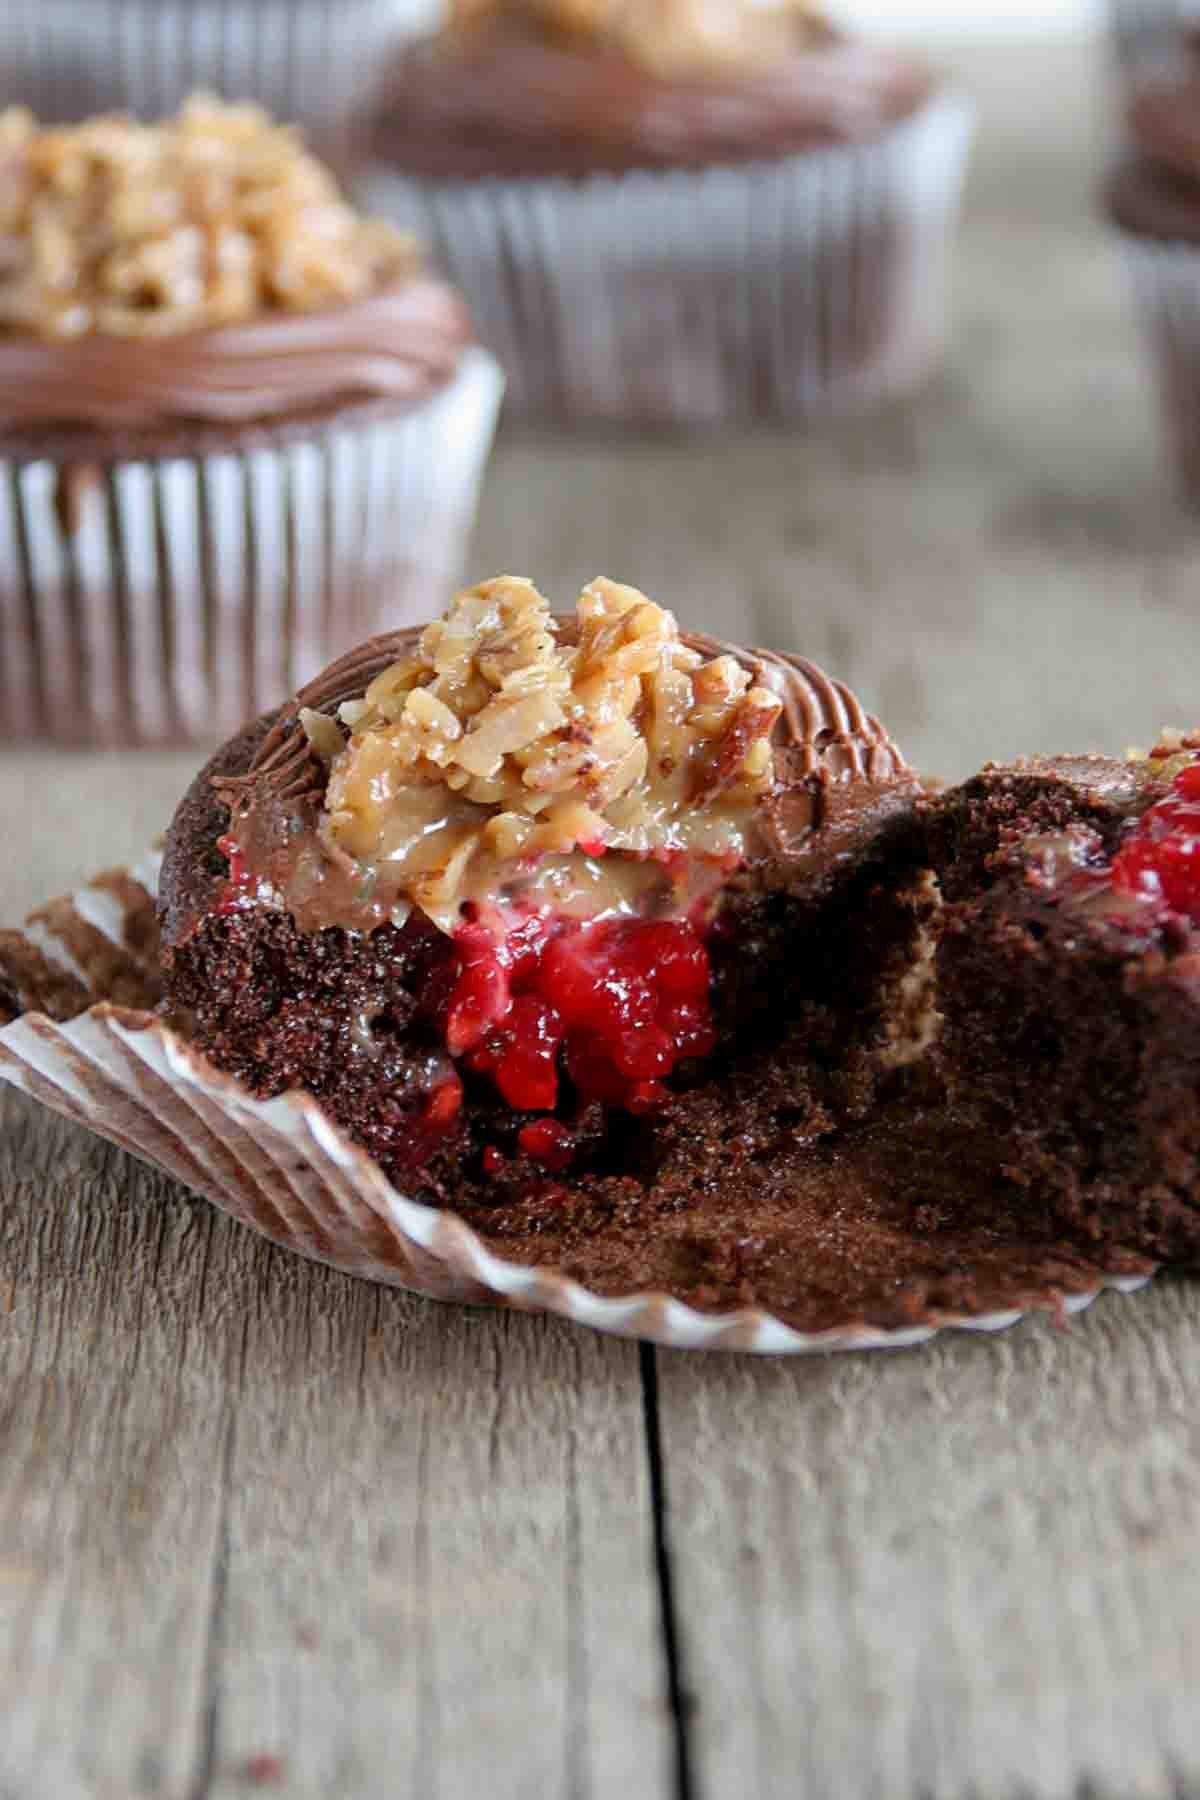 German Chocolate Cupcake with Raspberry Filling broken in half to show raspberry filling.